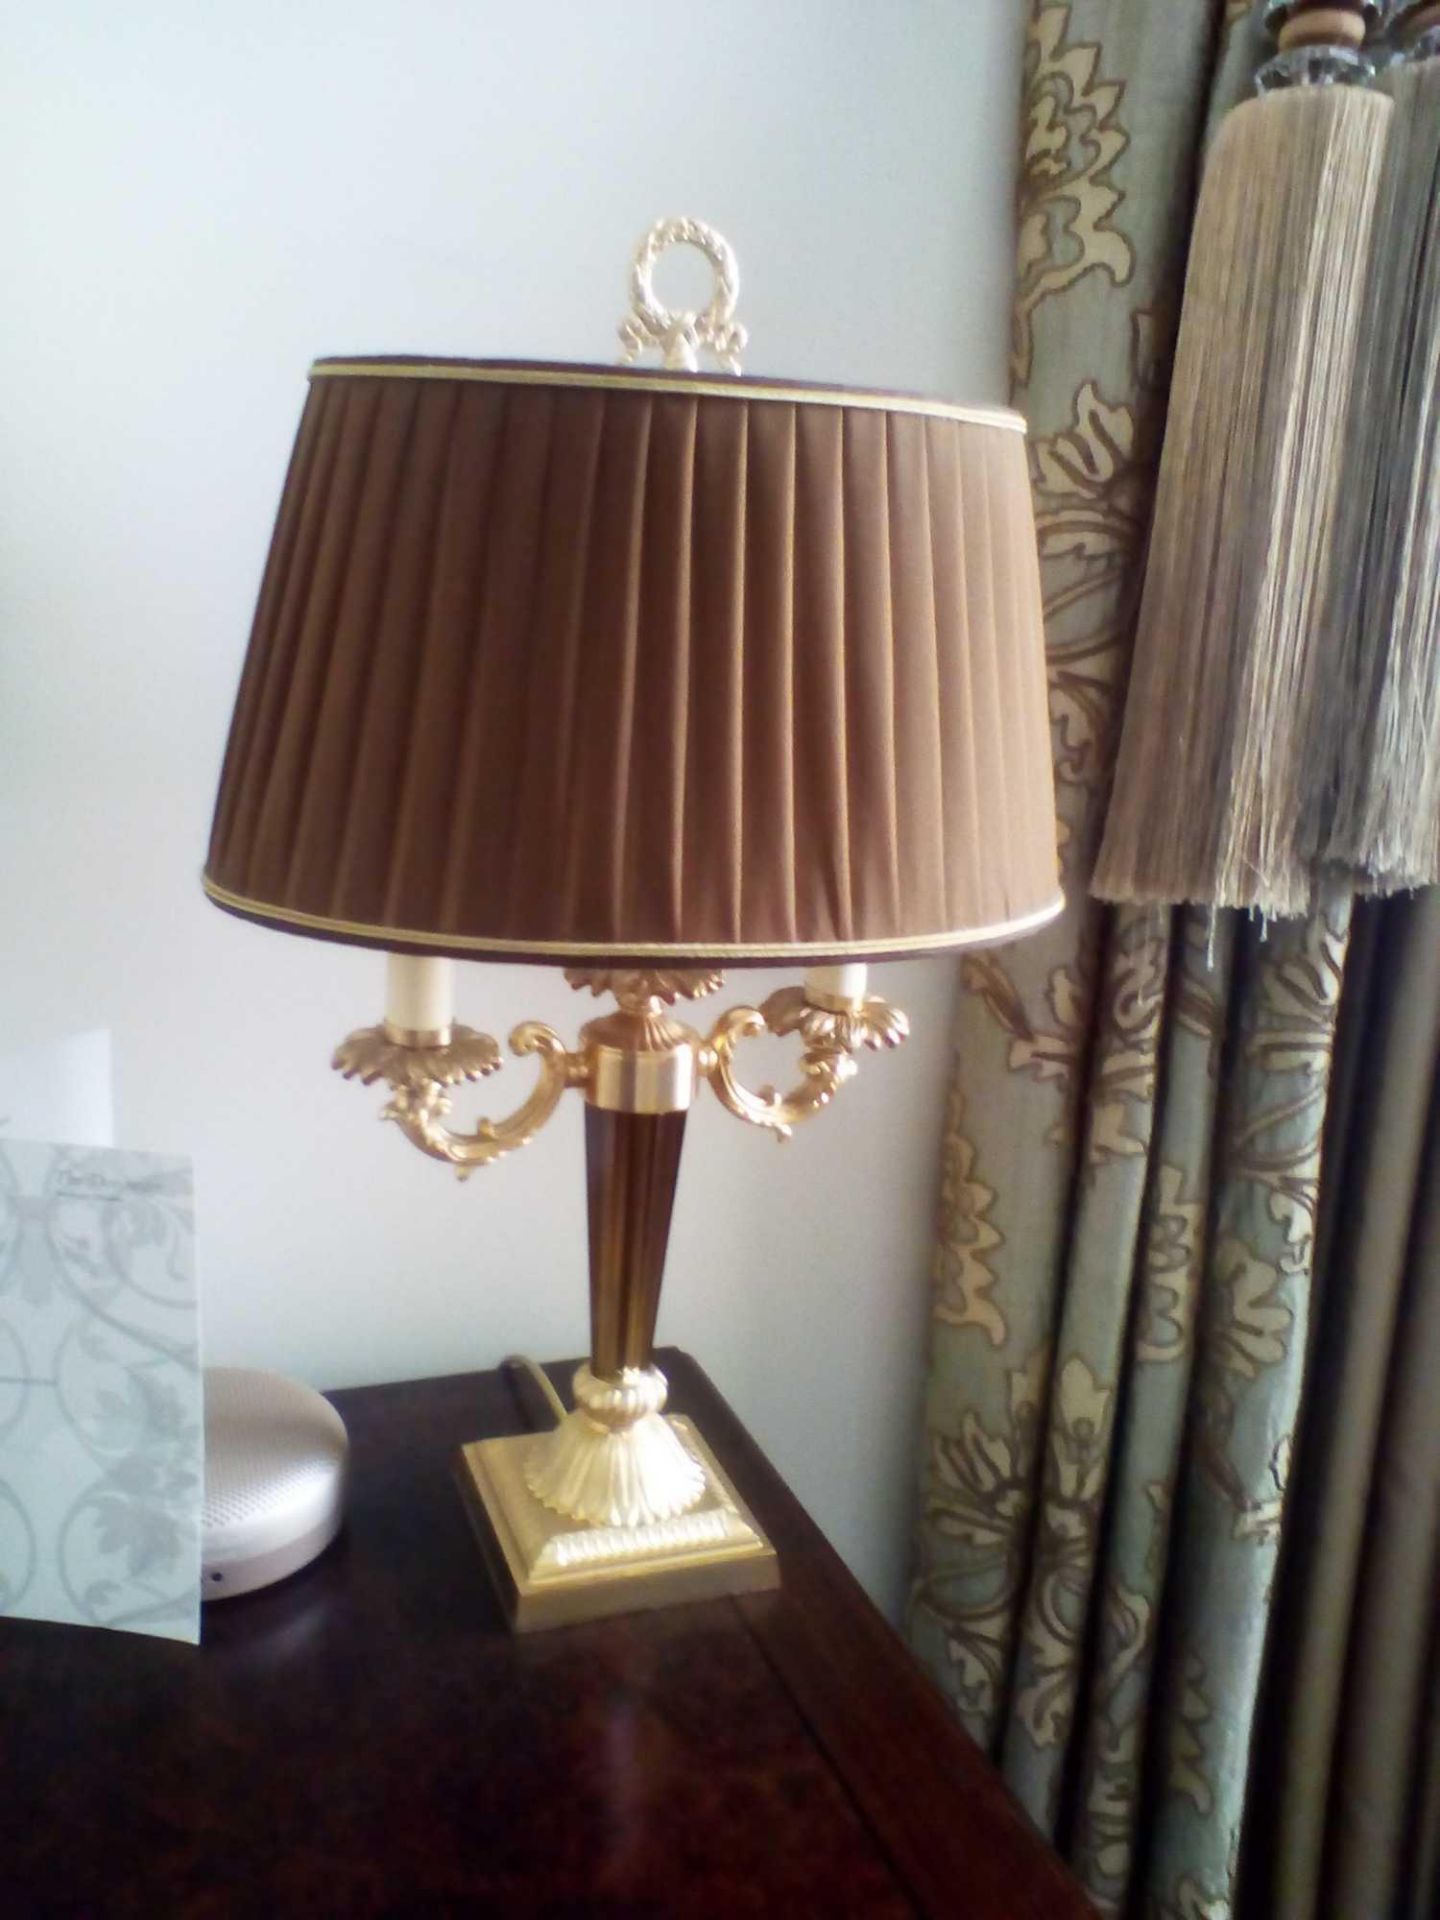 Laudarte Aretusa Twin Arm Table Lamp Bronze Lost-Wax Casting Antique Gilt Bronze Base And Column And - Image 2 of 2